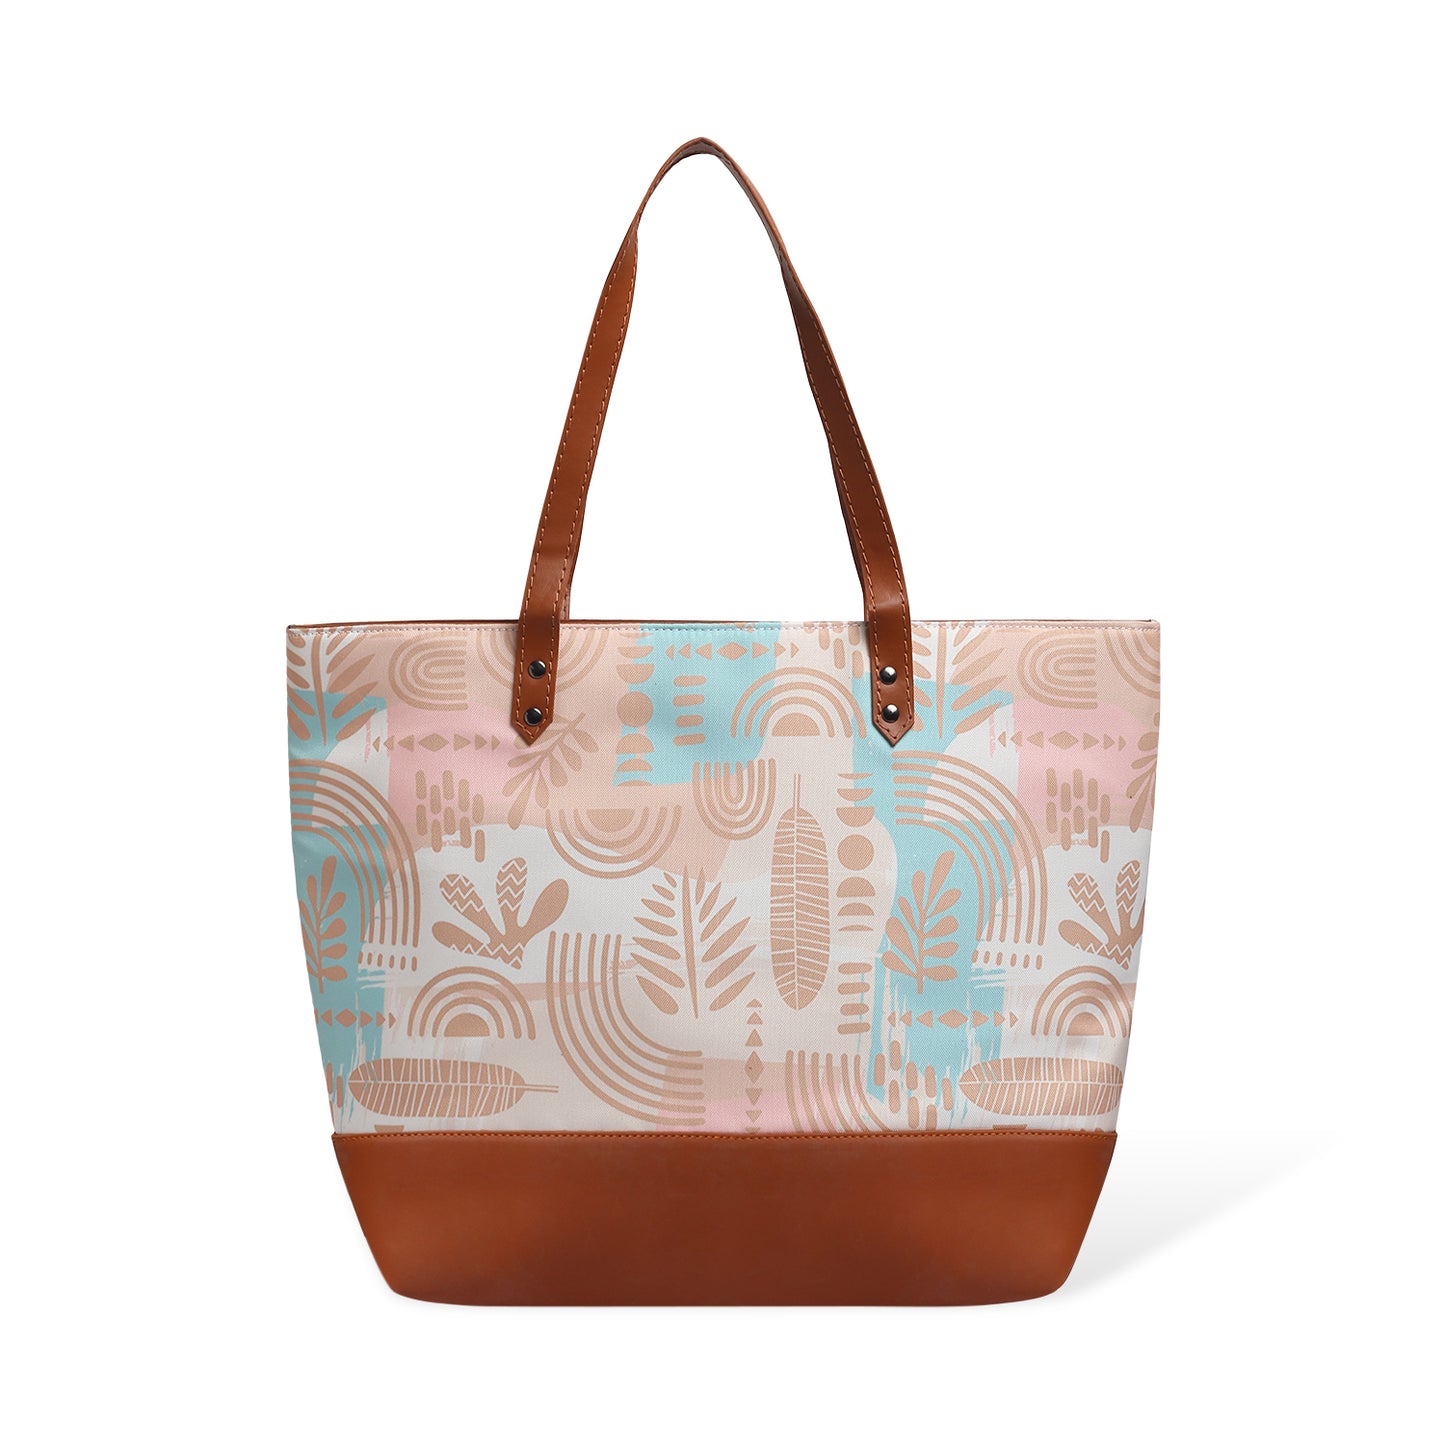 Fashionable tote bag with light blue and pink motif